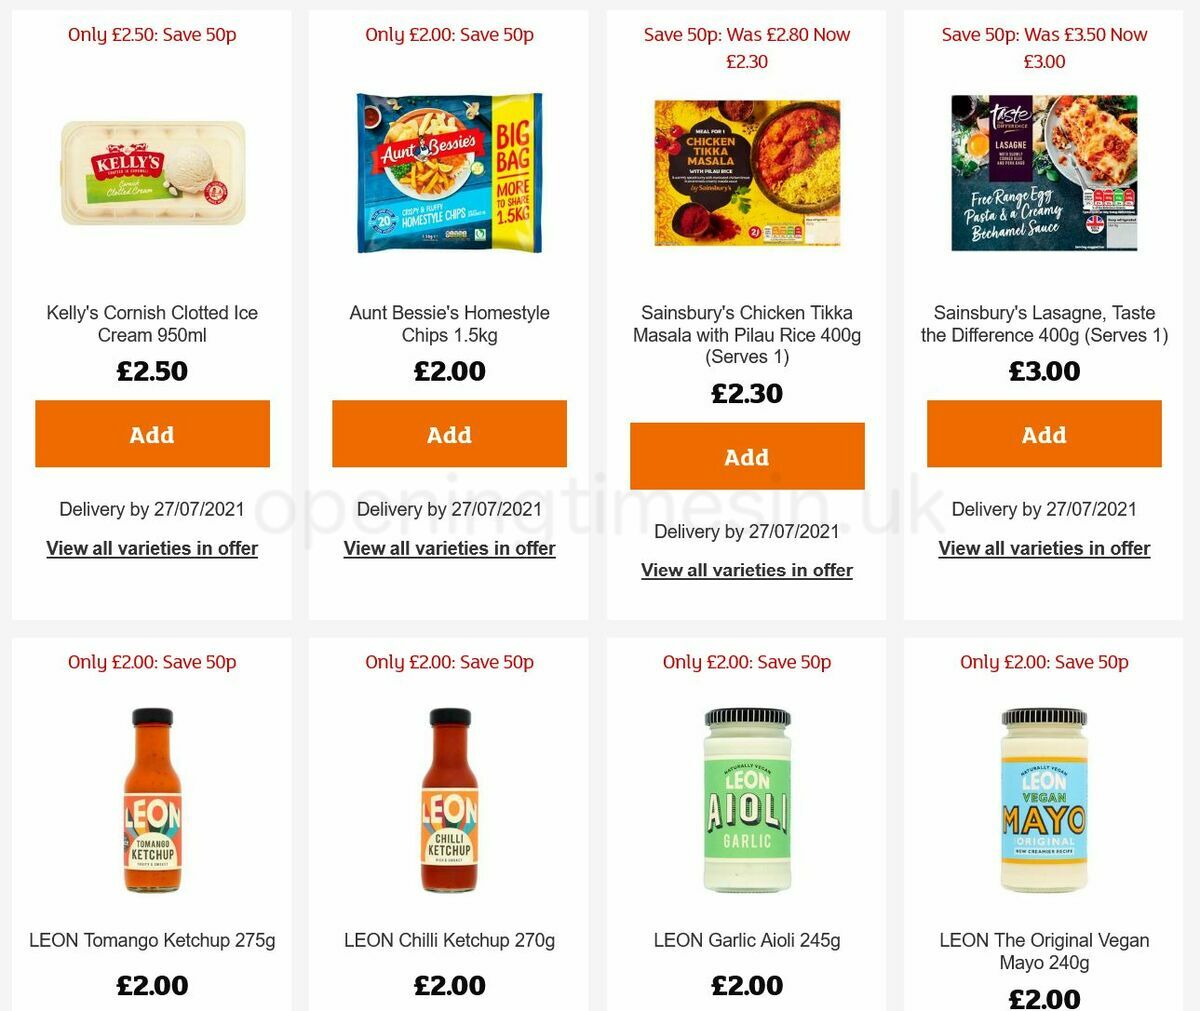 Sainsbury's Offers from 8 July